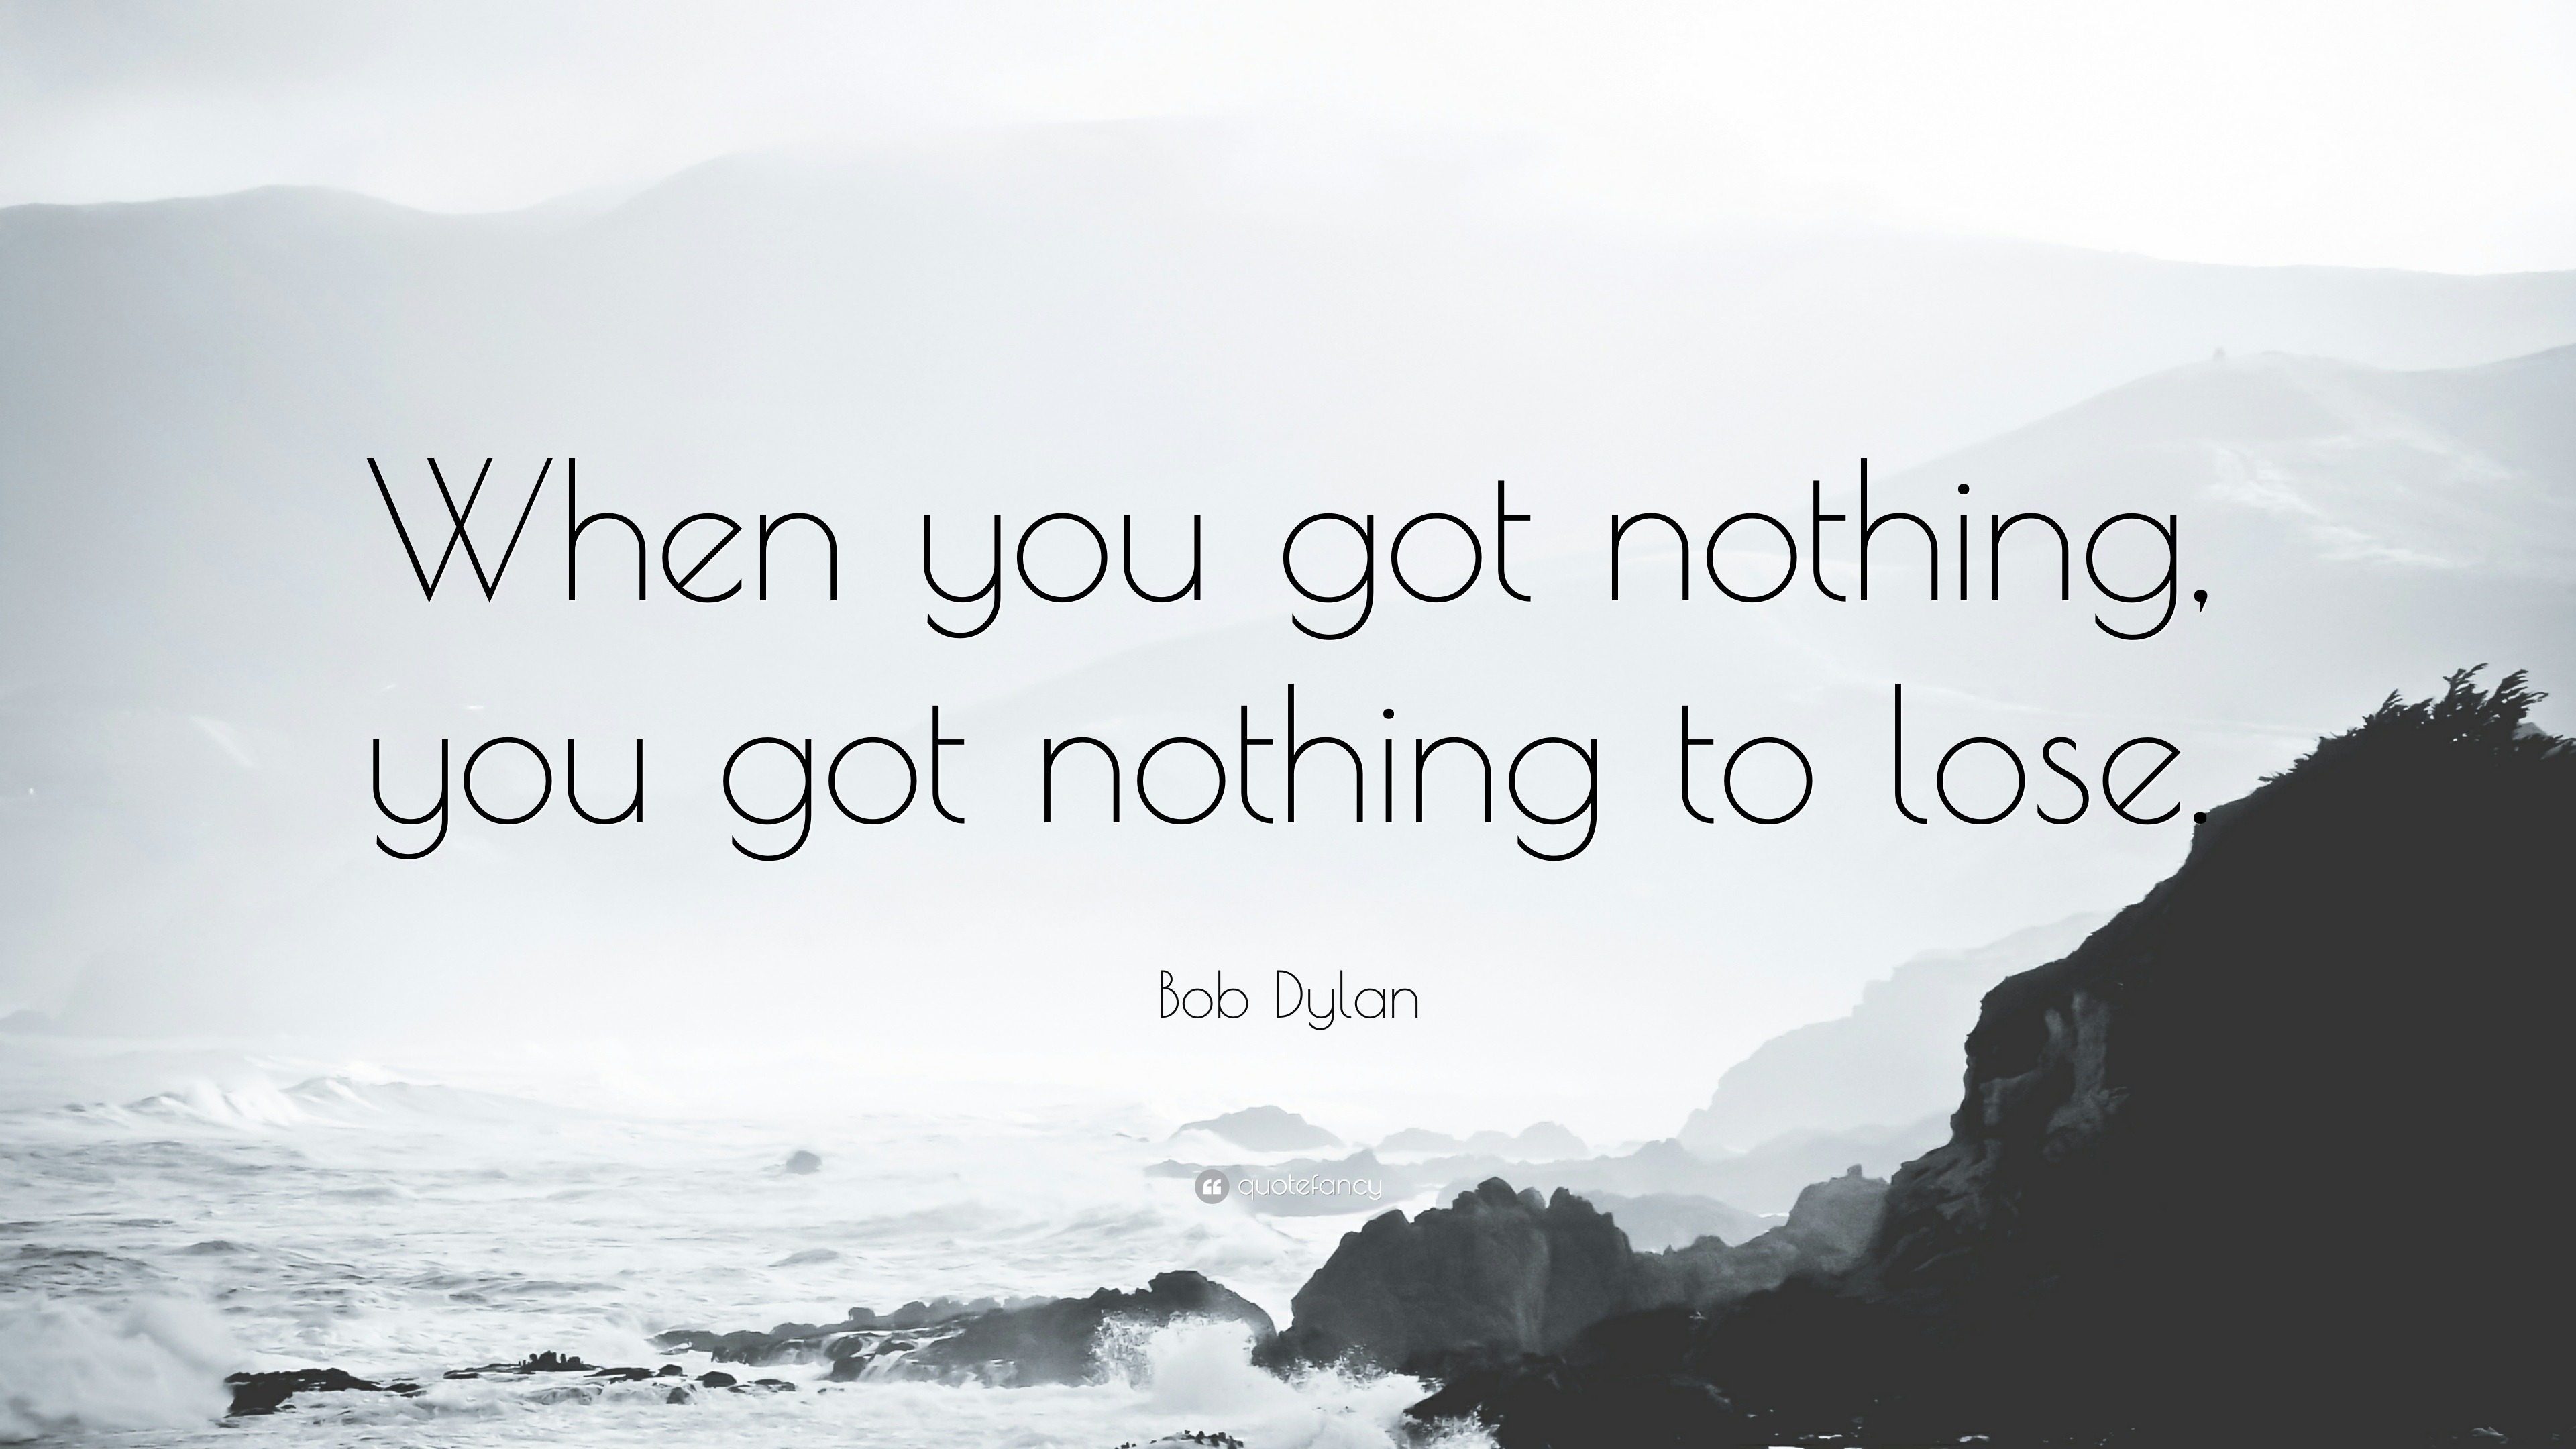 10310-Bob-Dylan-Quote-When-you-got-nothing-you-got-nothing-to-lose.jpg